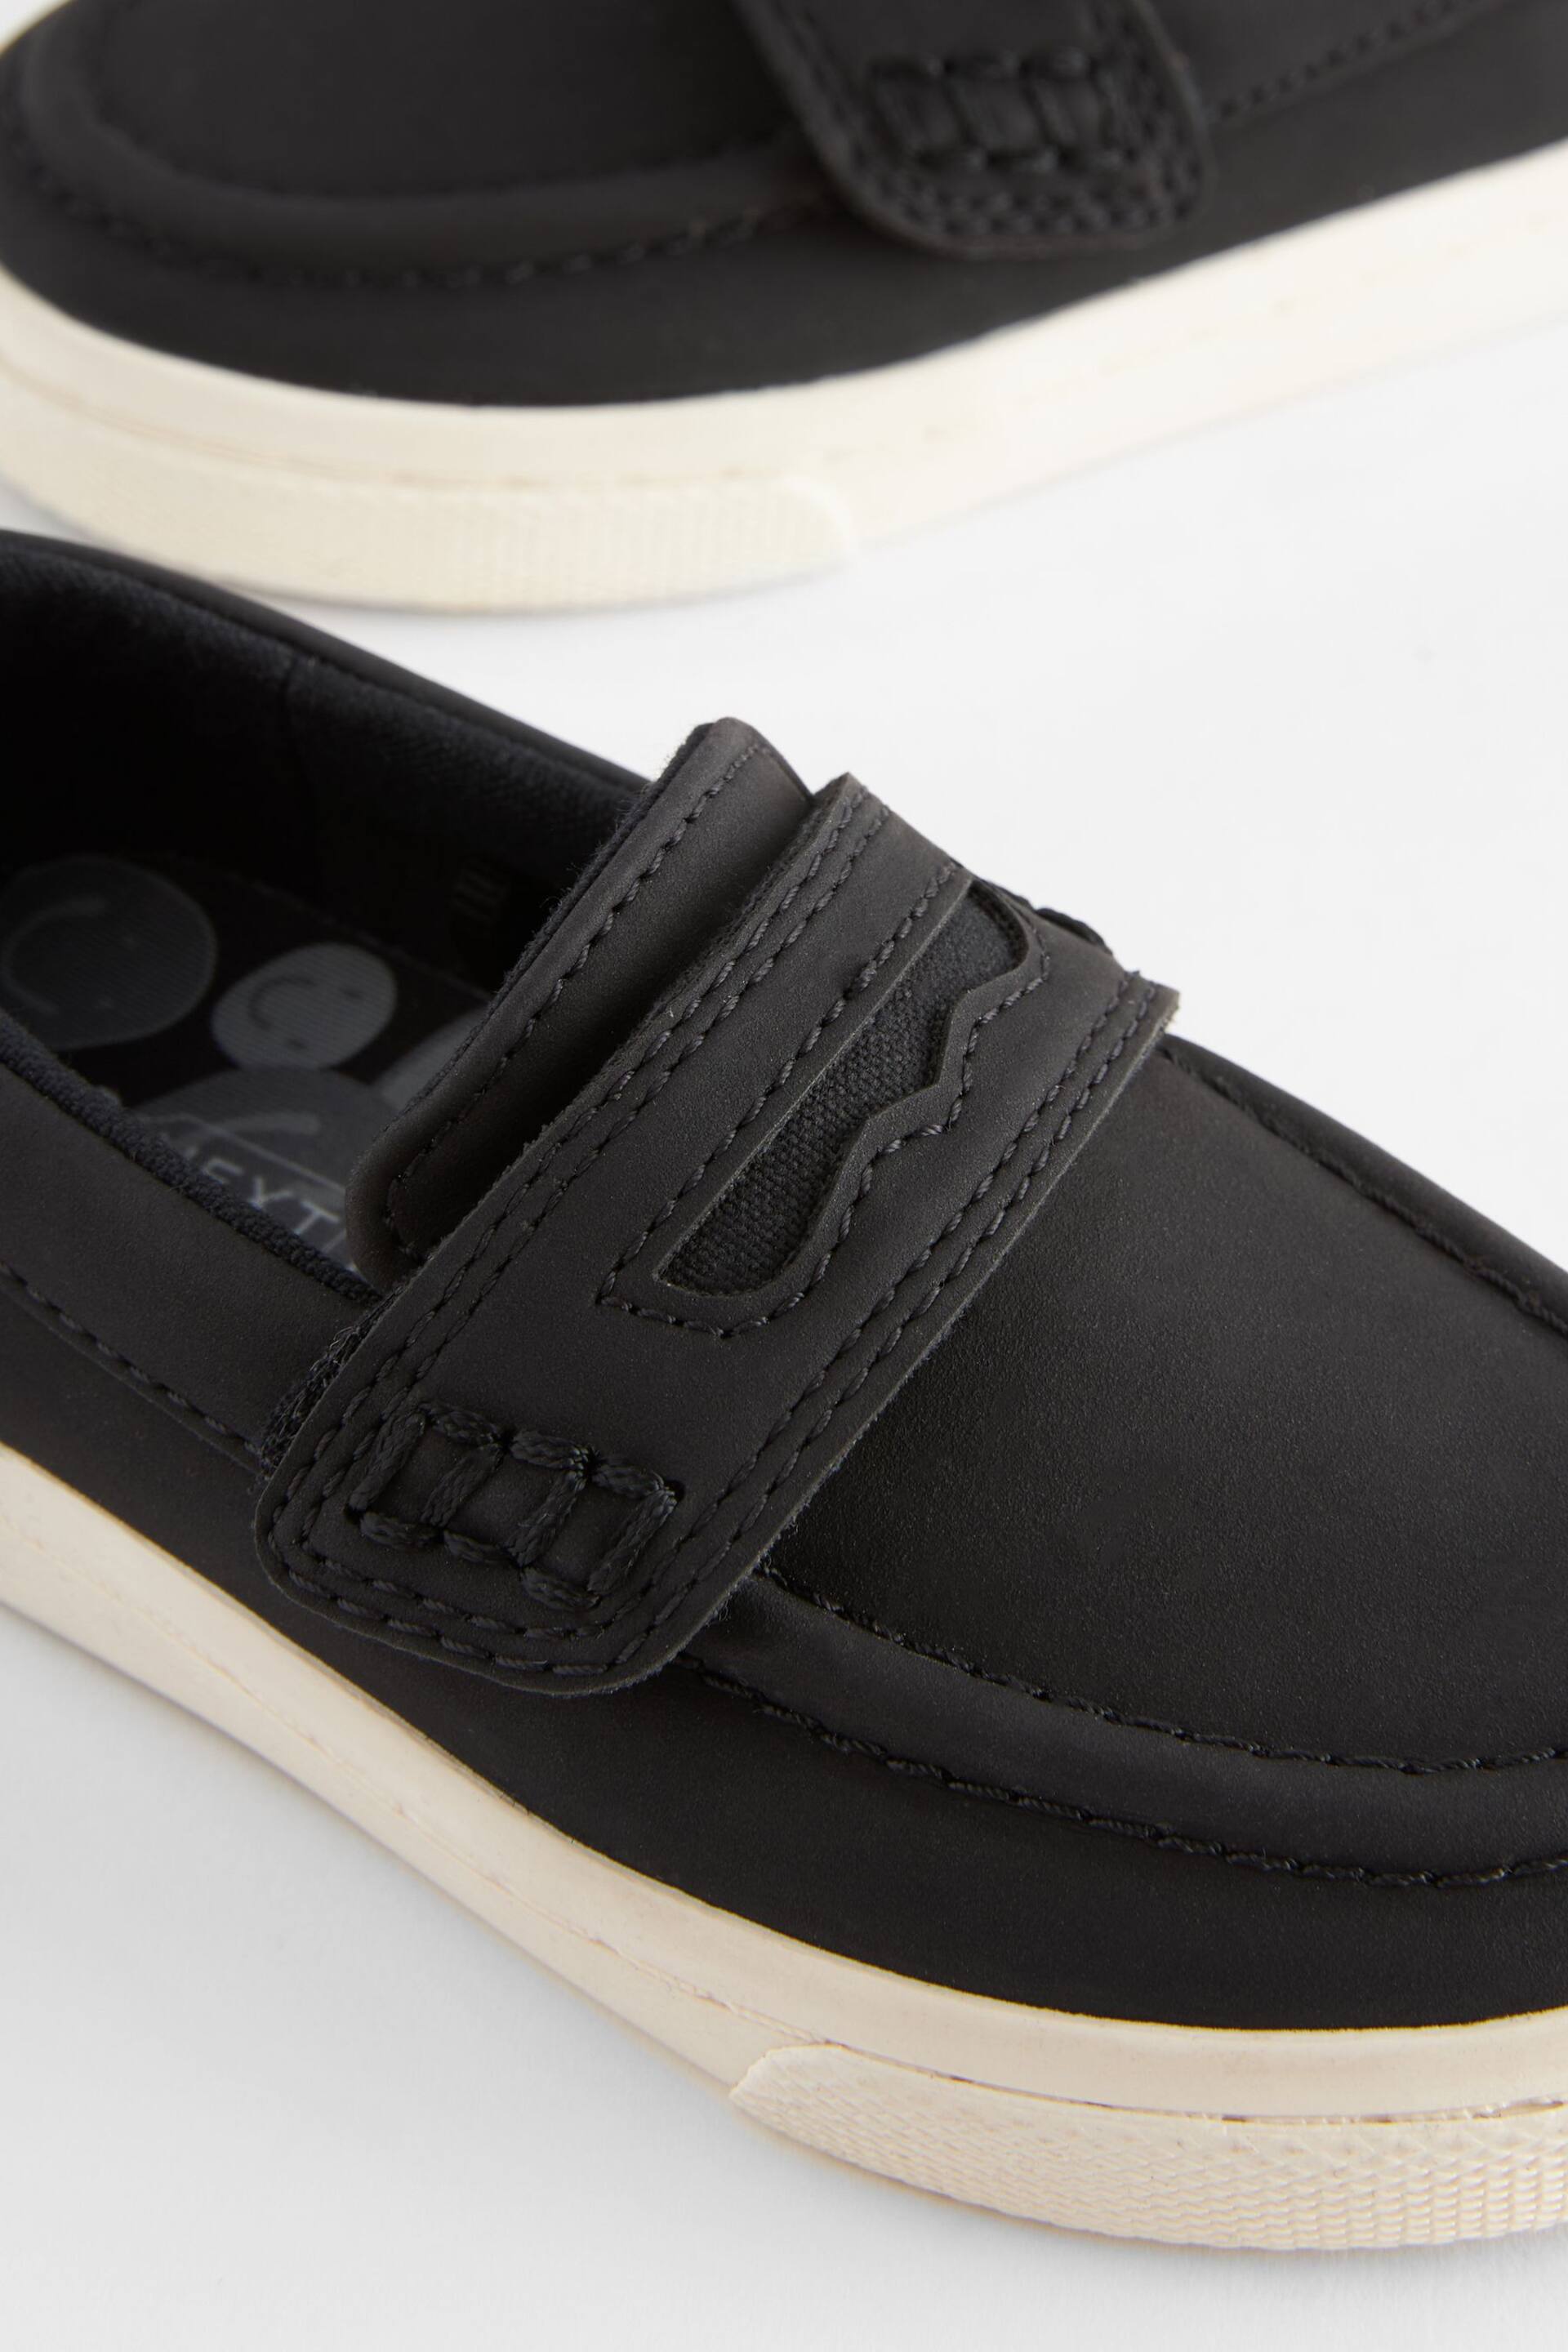 Black Standard Fit (F) Penny Loafers - Image 6 of 6